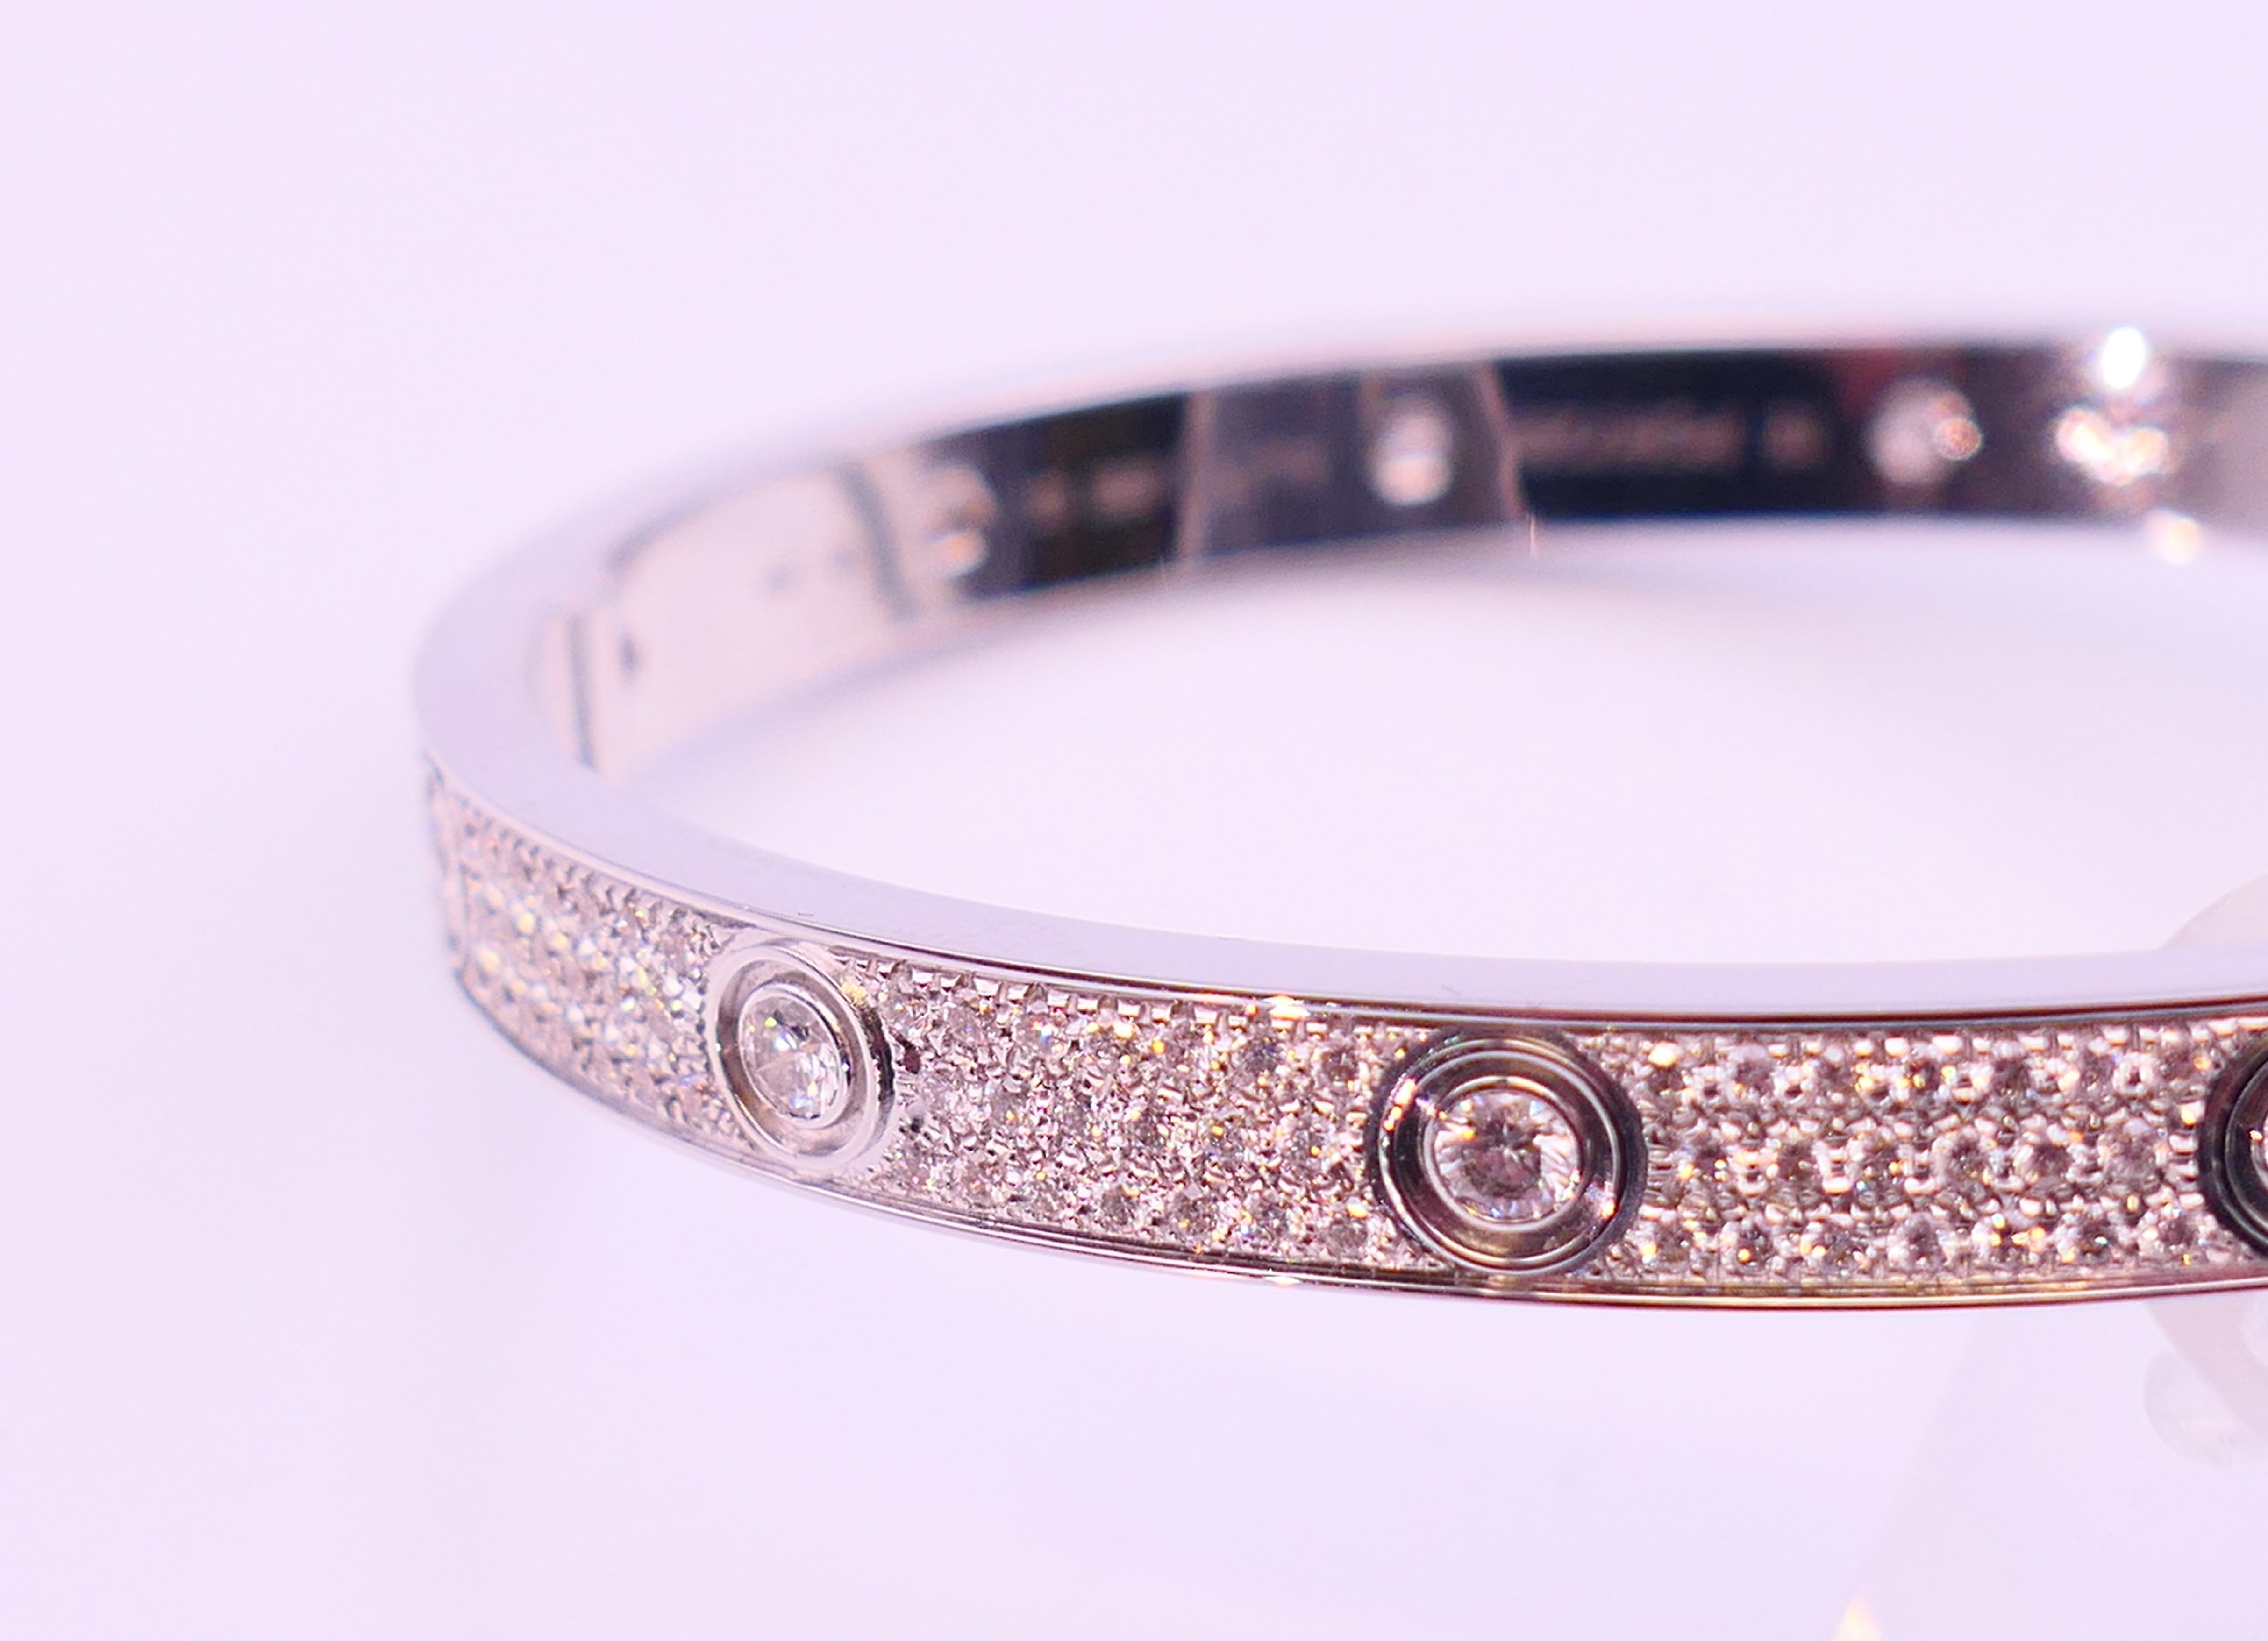 A Cartier 18 K white gold and diamond encrusted love bangle numbered 19 PDR729. 6. - Image 10 of 13